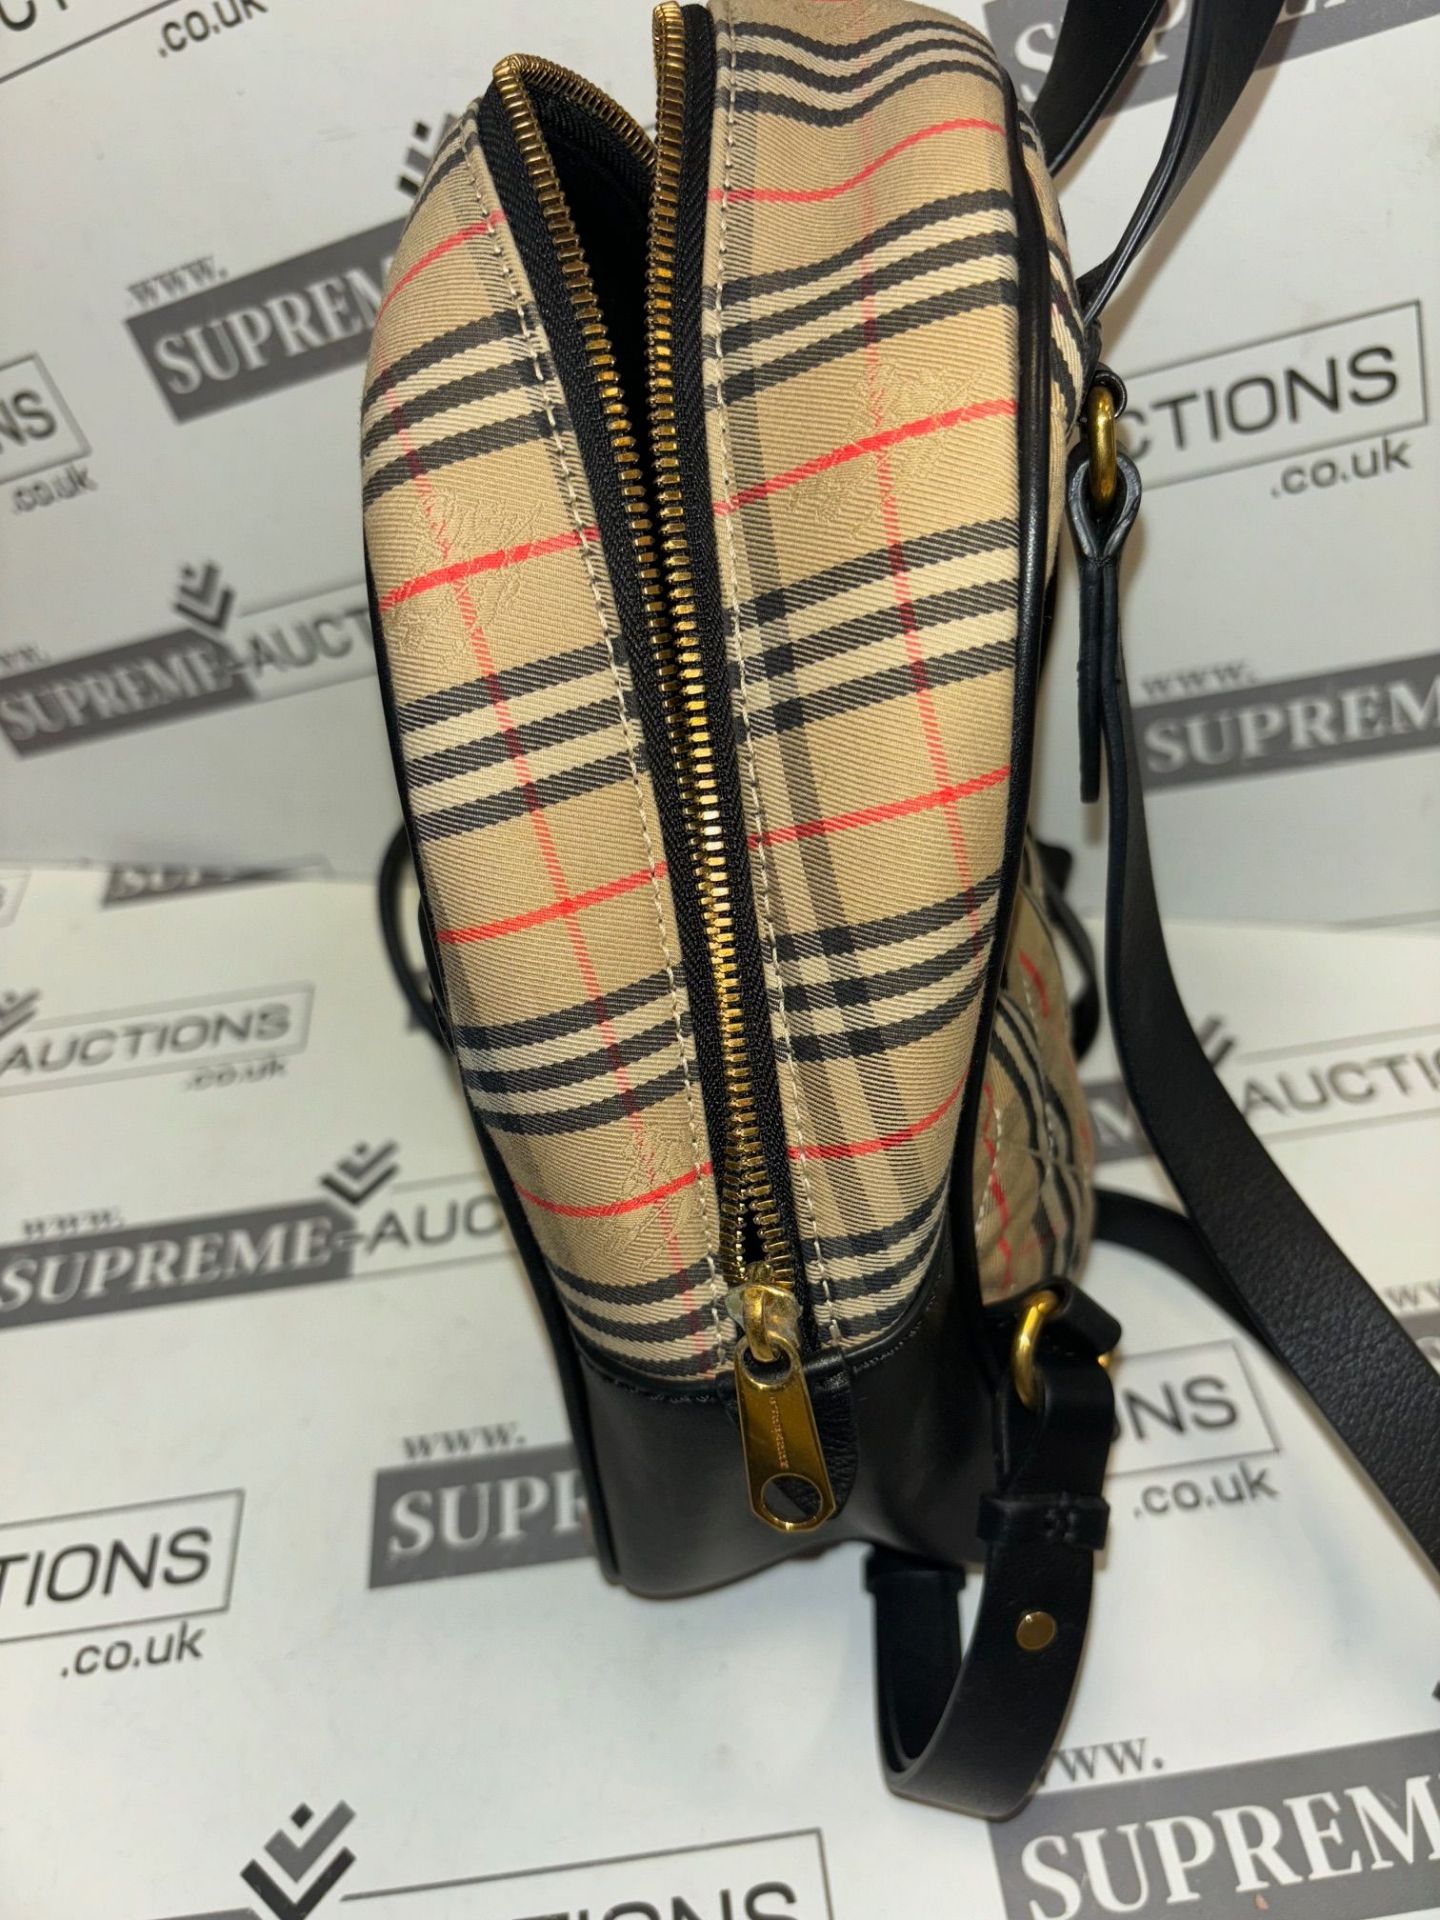 Burberry Link Backpack in Nova Check. 20x25cm. - Image 10 of 10